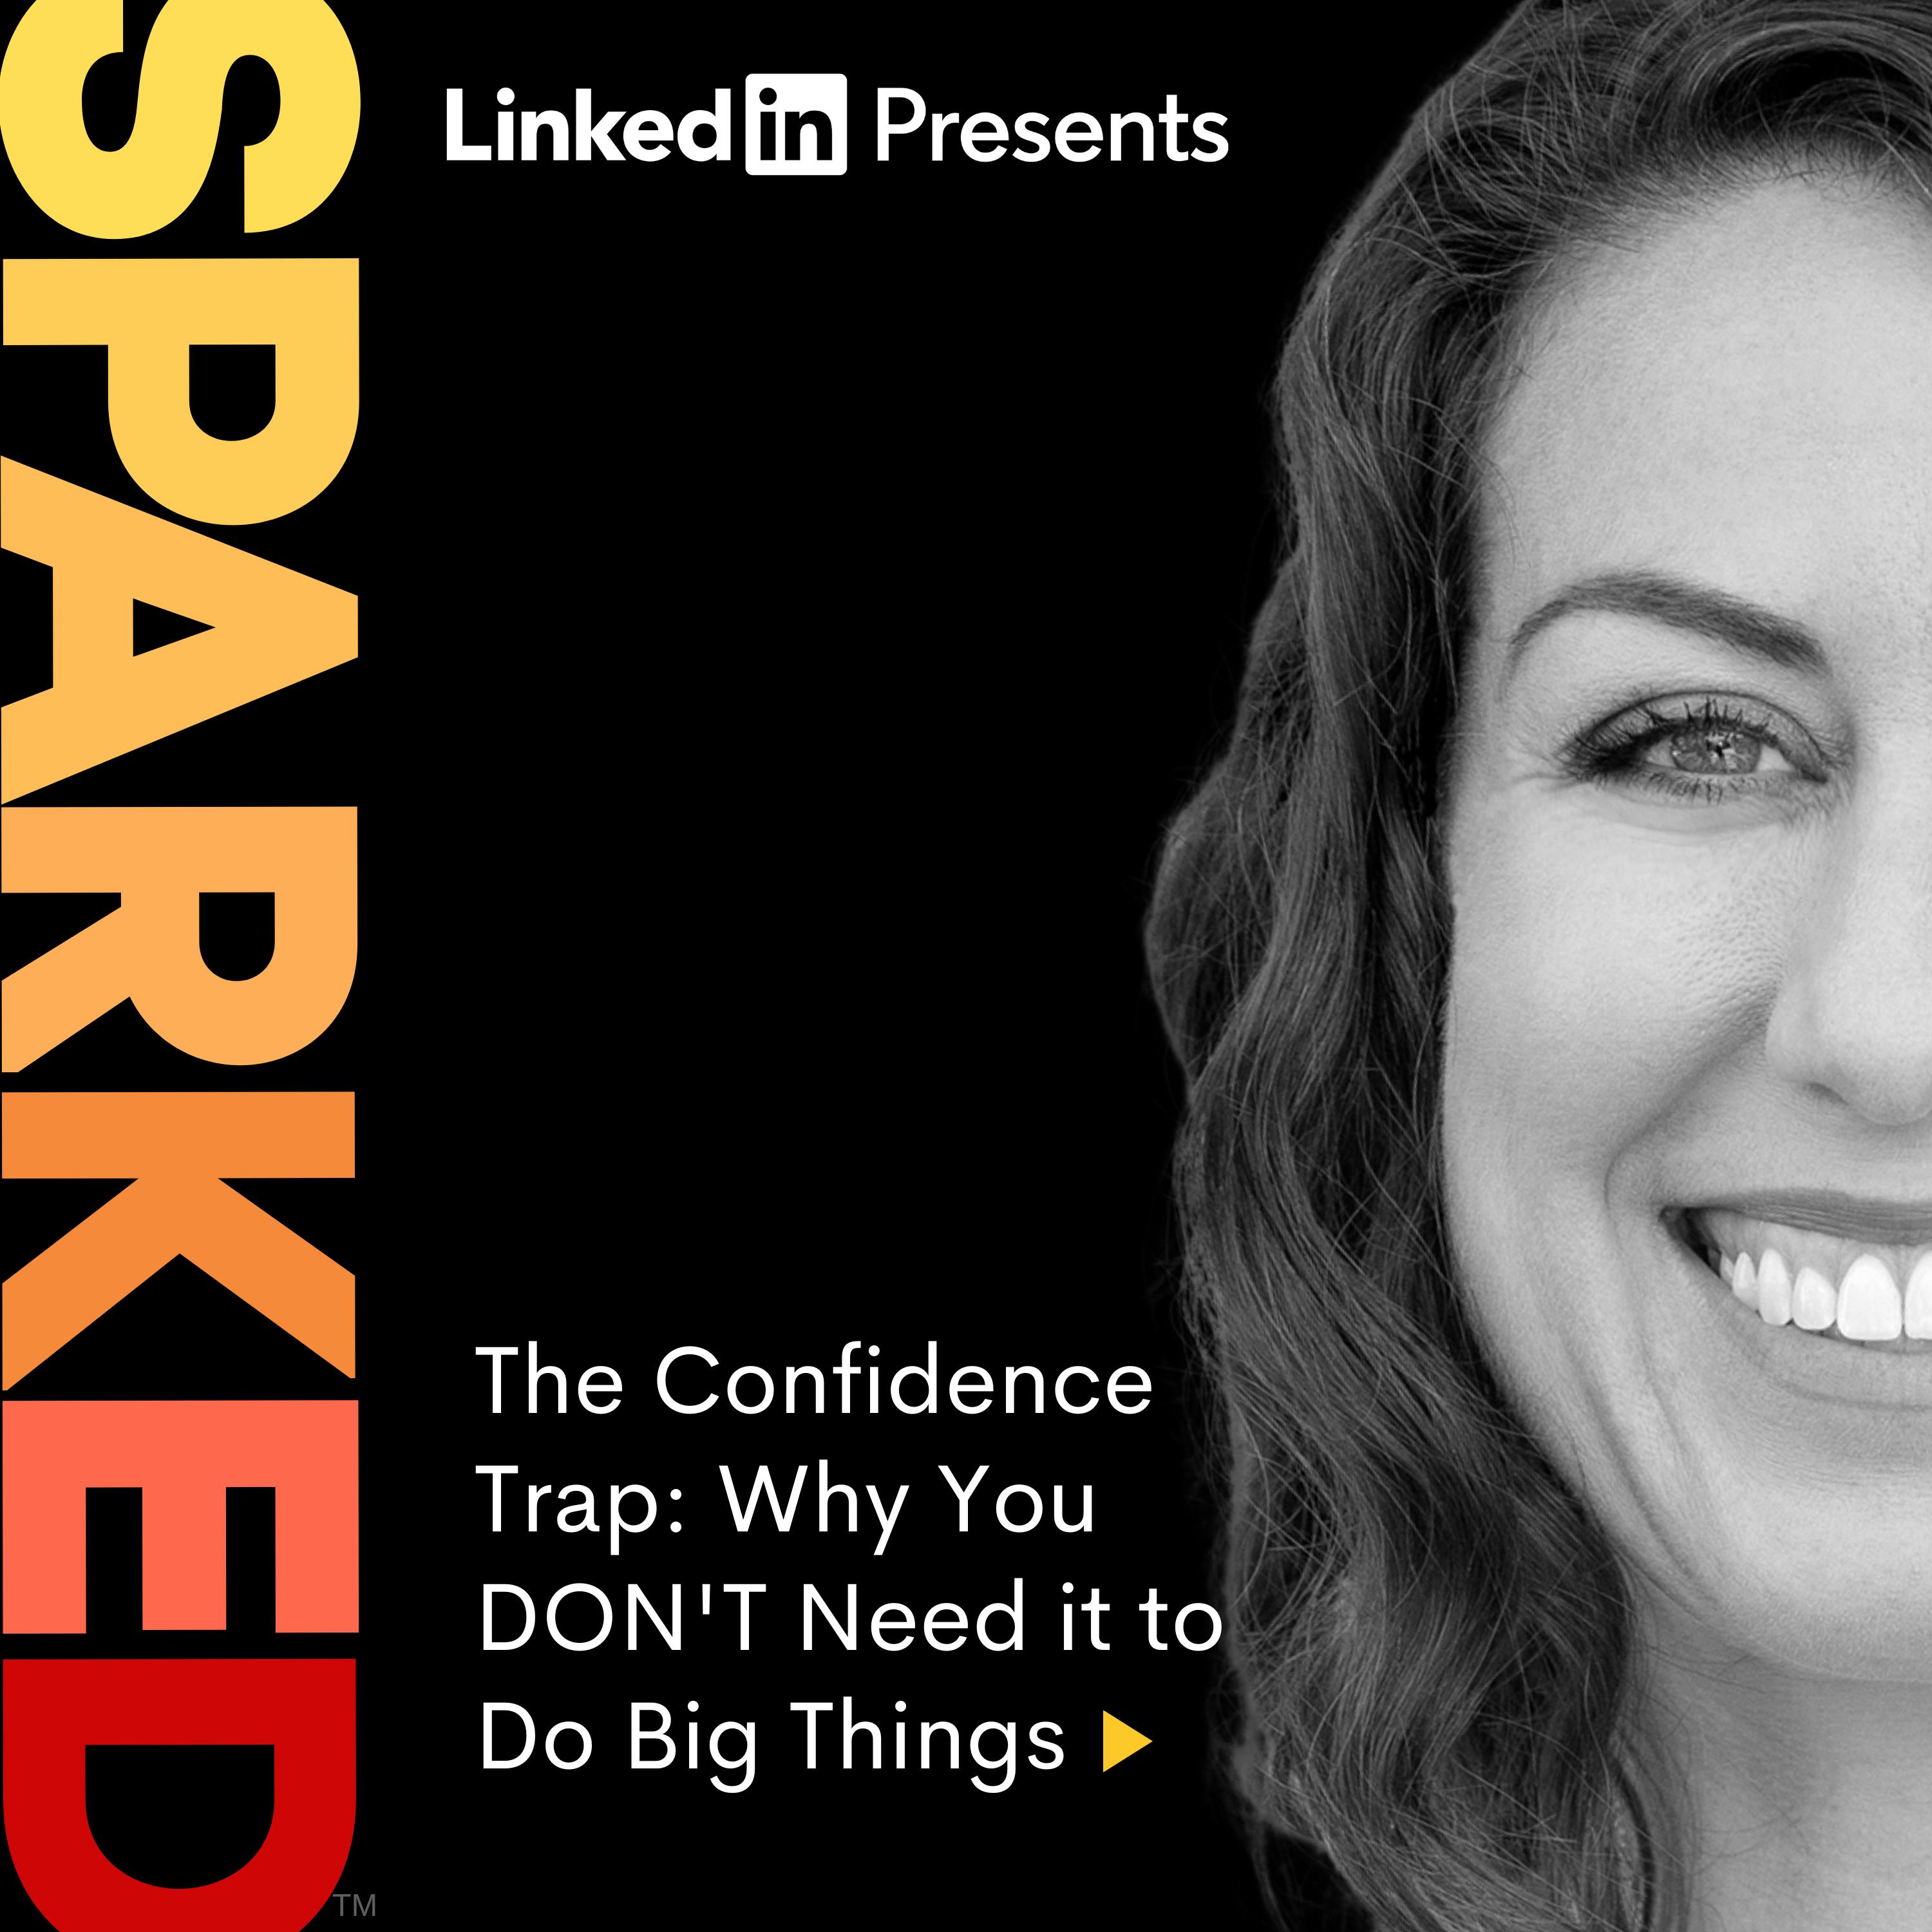 The Confidence Trap: Why You DON’T Need it to Do Big Things